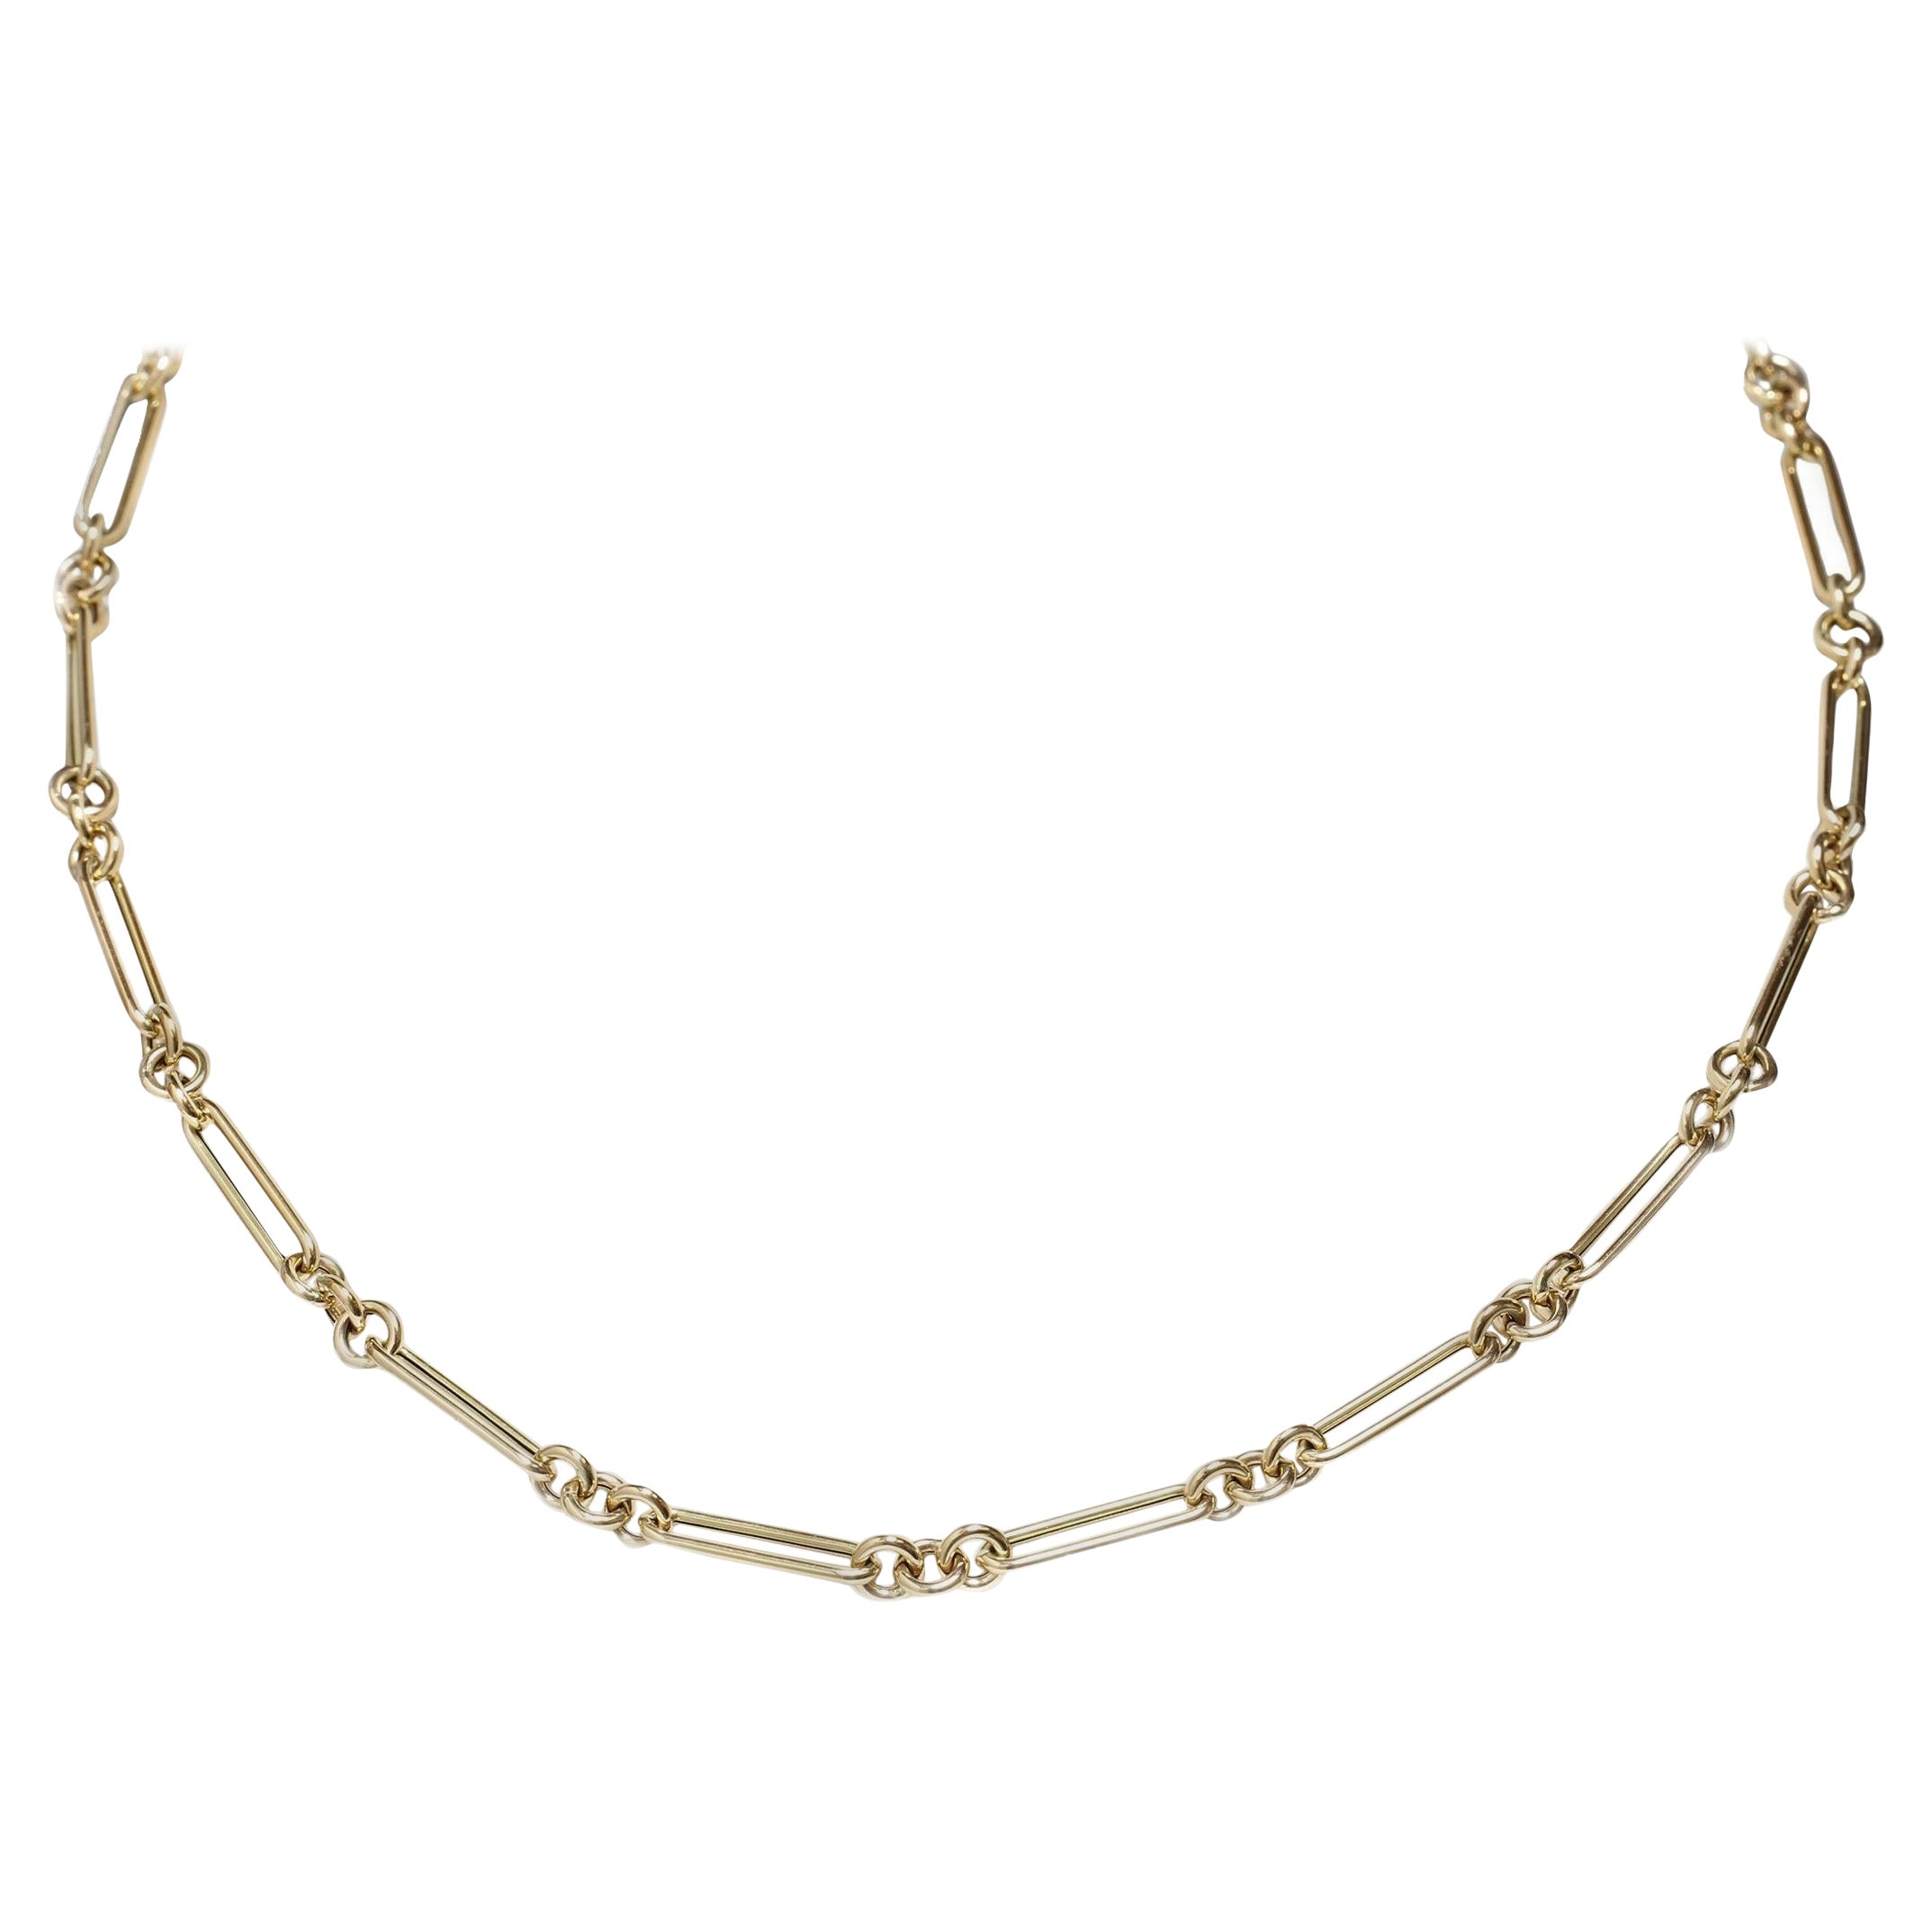 Paper Clip Link and Rolo Chain Necklace in 14K Yellow Gold - 18"